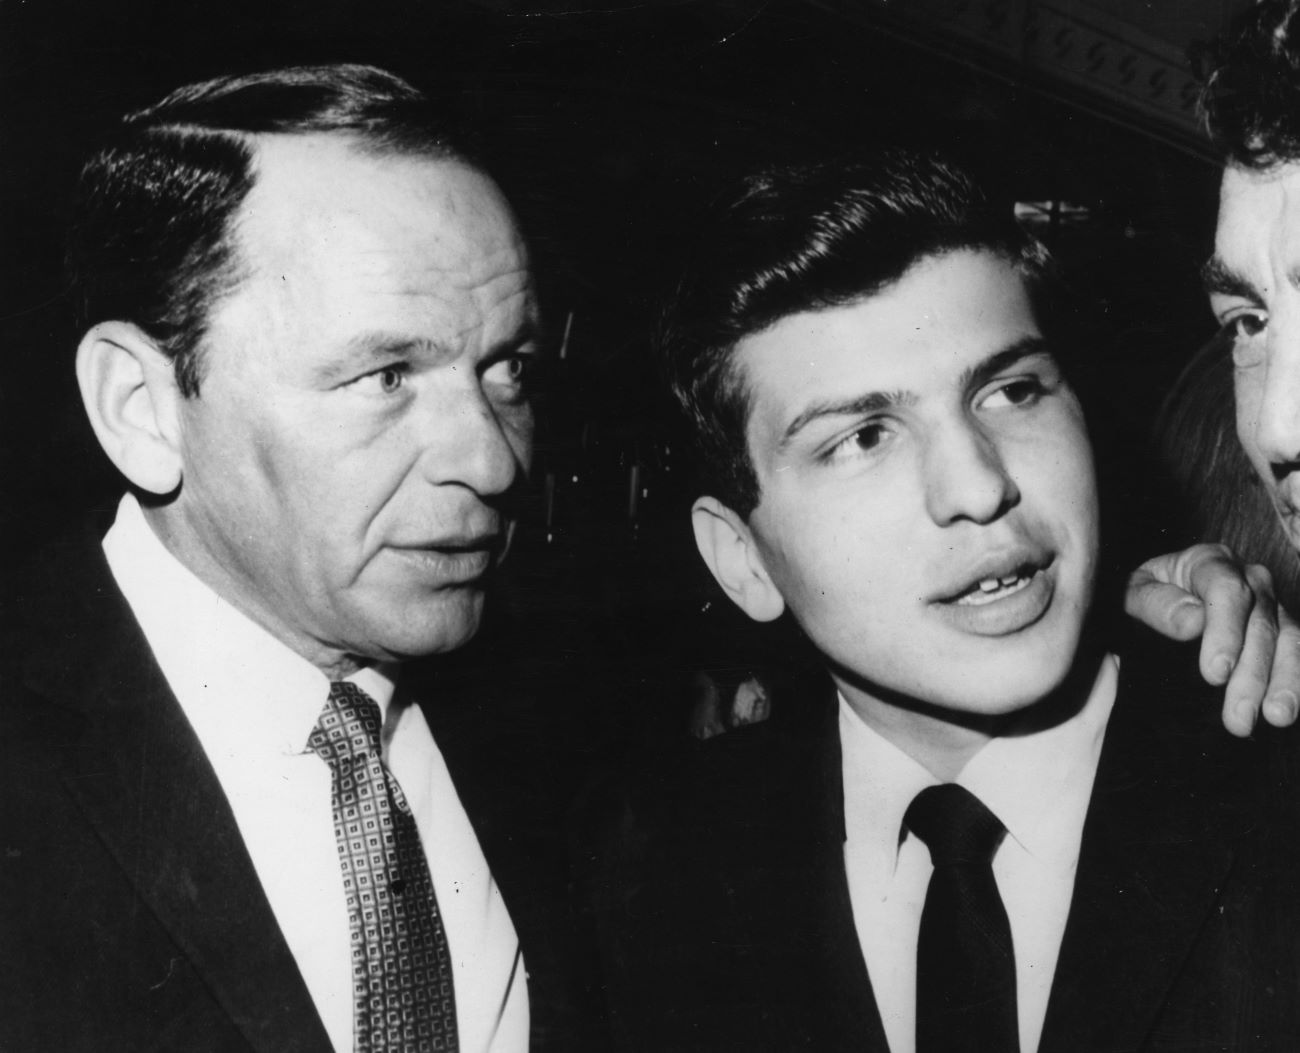 Frank Sinatra stands with his arm around the shoulders of Frank Sinatra Jr. They both wear suits.